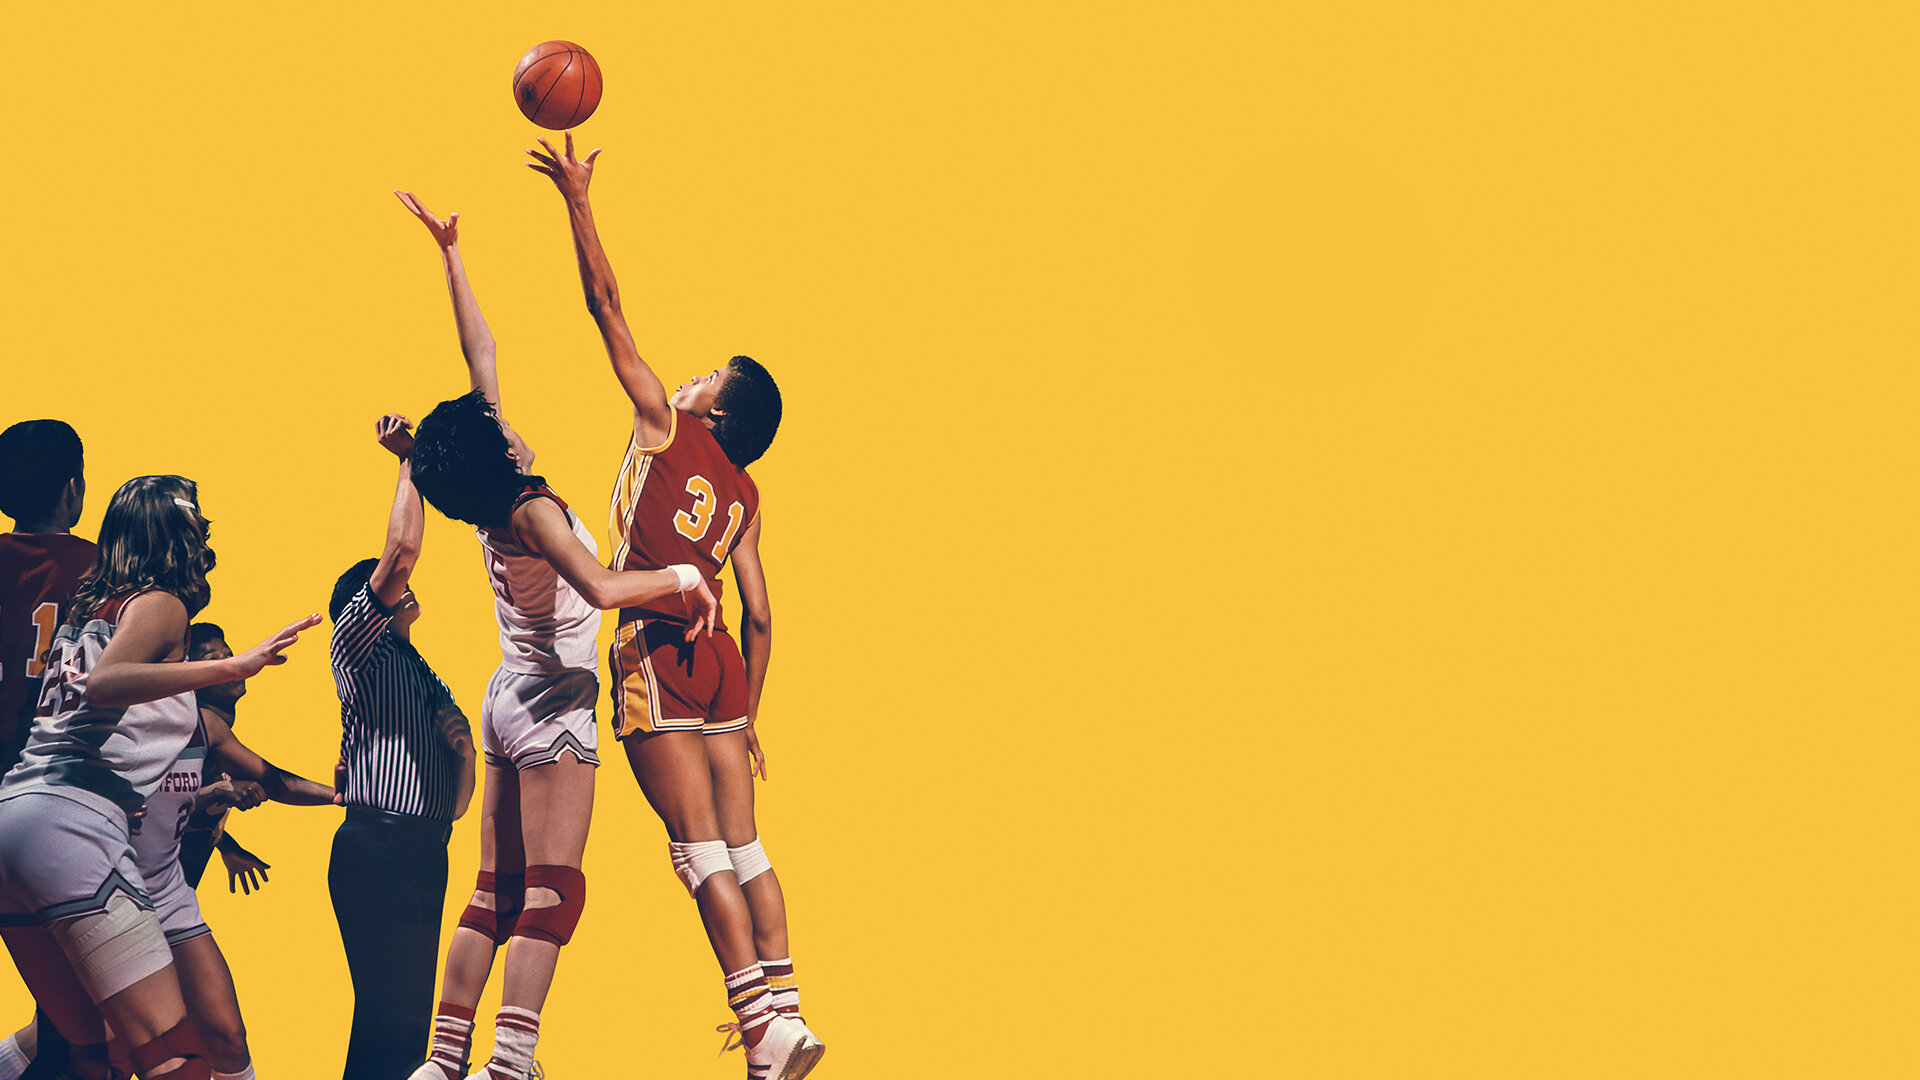  Women of Troy is a documentary film highlighting the historic and groundbreaking USC women’s basketball team of the 1980s, whose talent and charisma created new possibilities for women in basketball and helped paved the way for the WNBA. Led by Cher